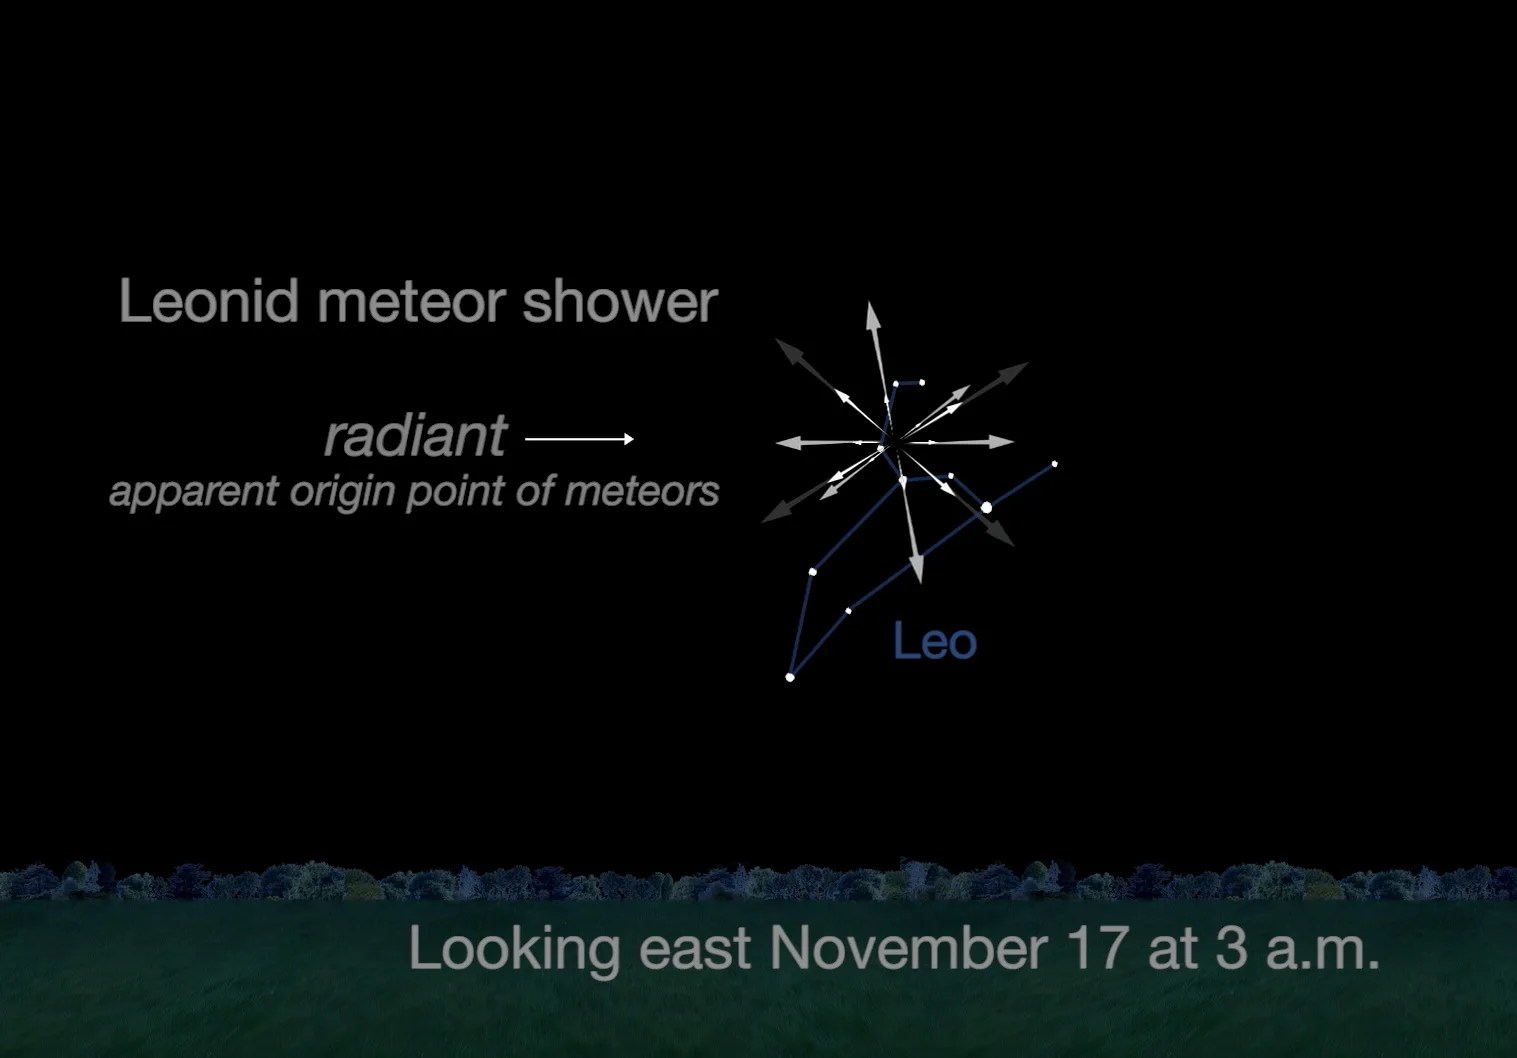 Chart showing Leonid Meteors radiating from constellation Leo.